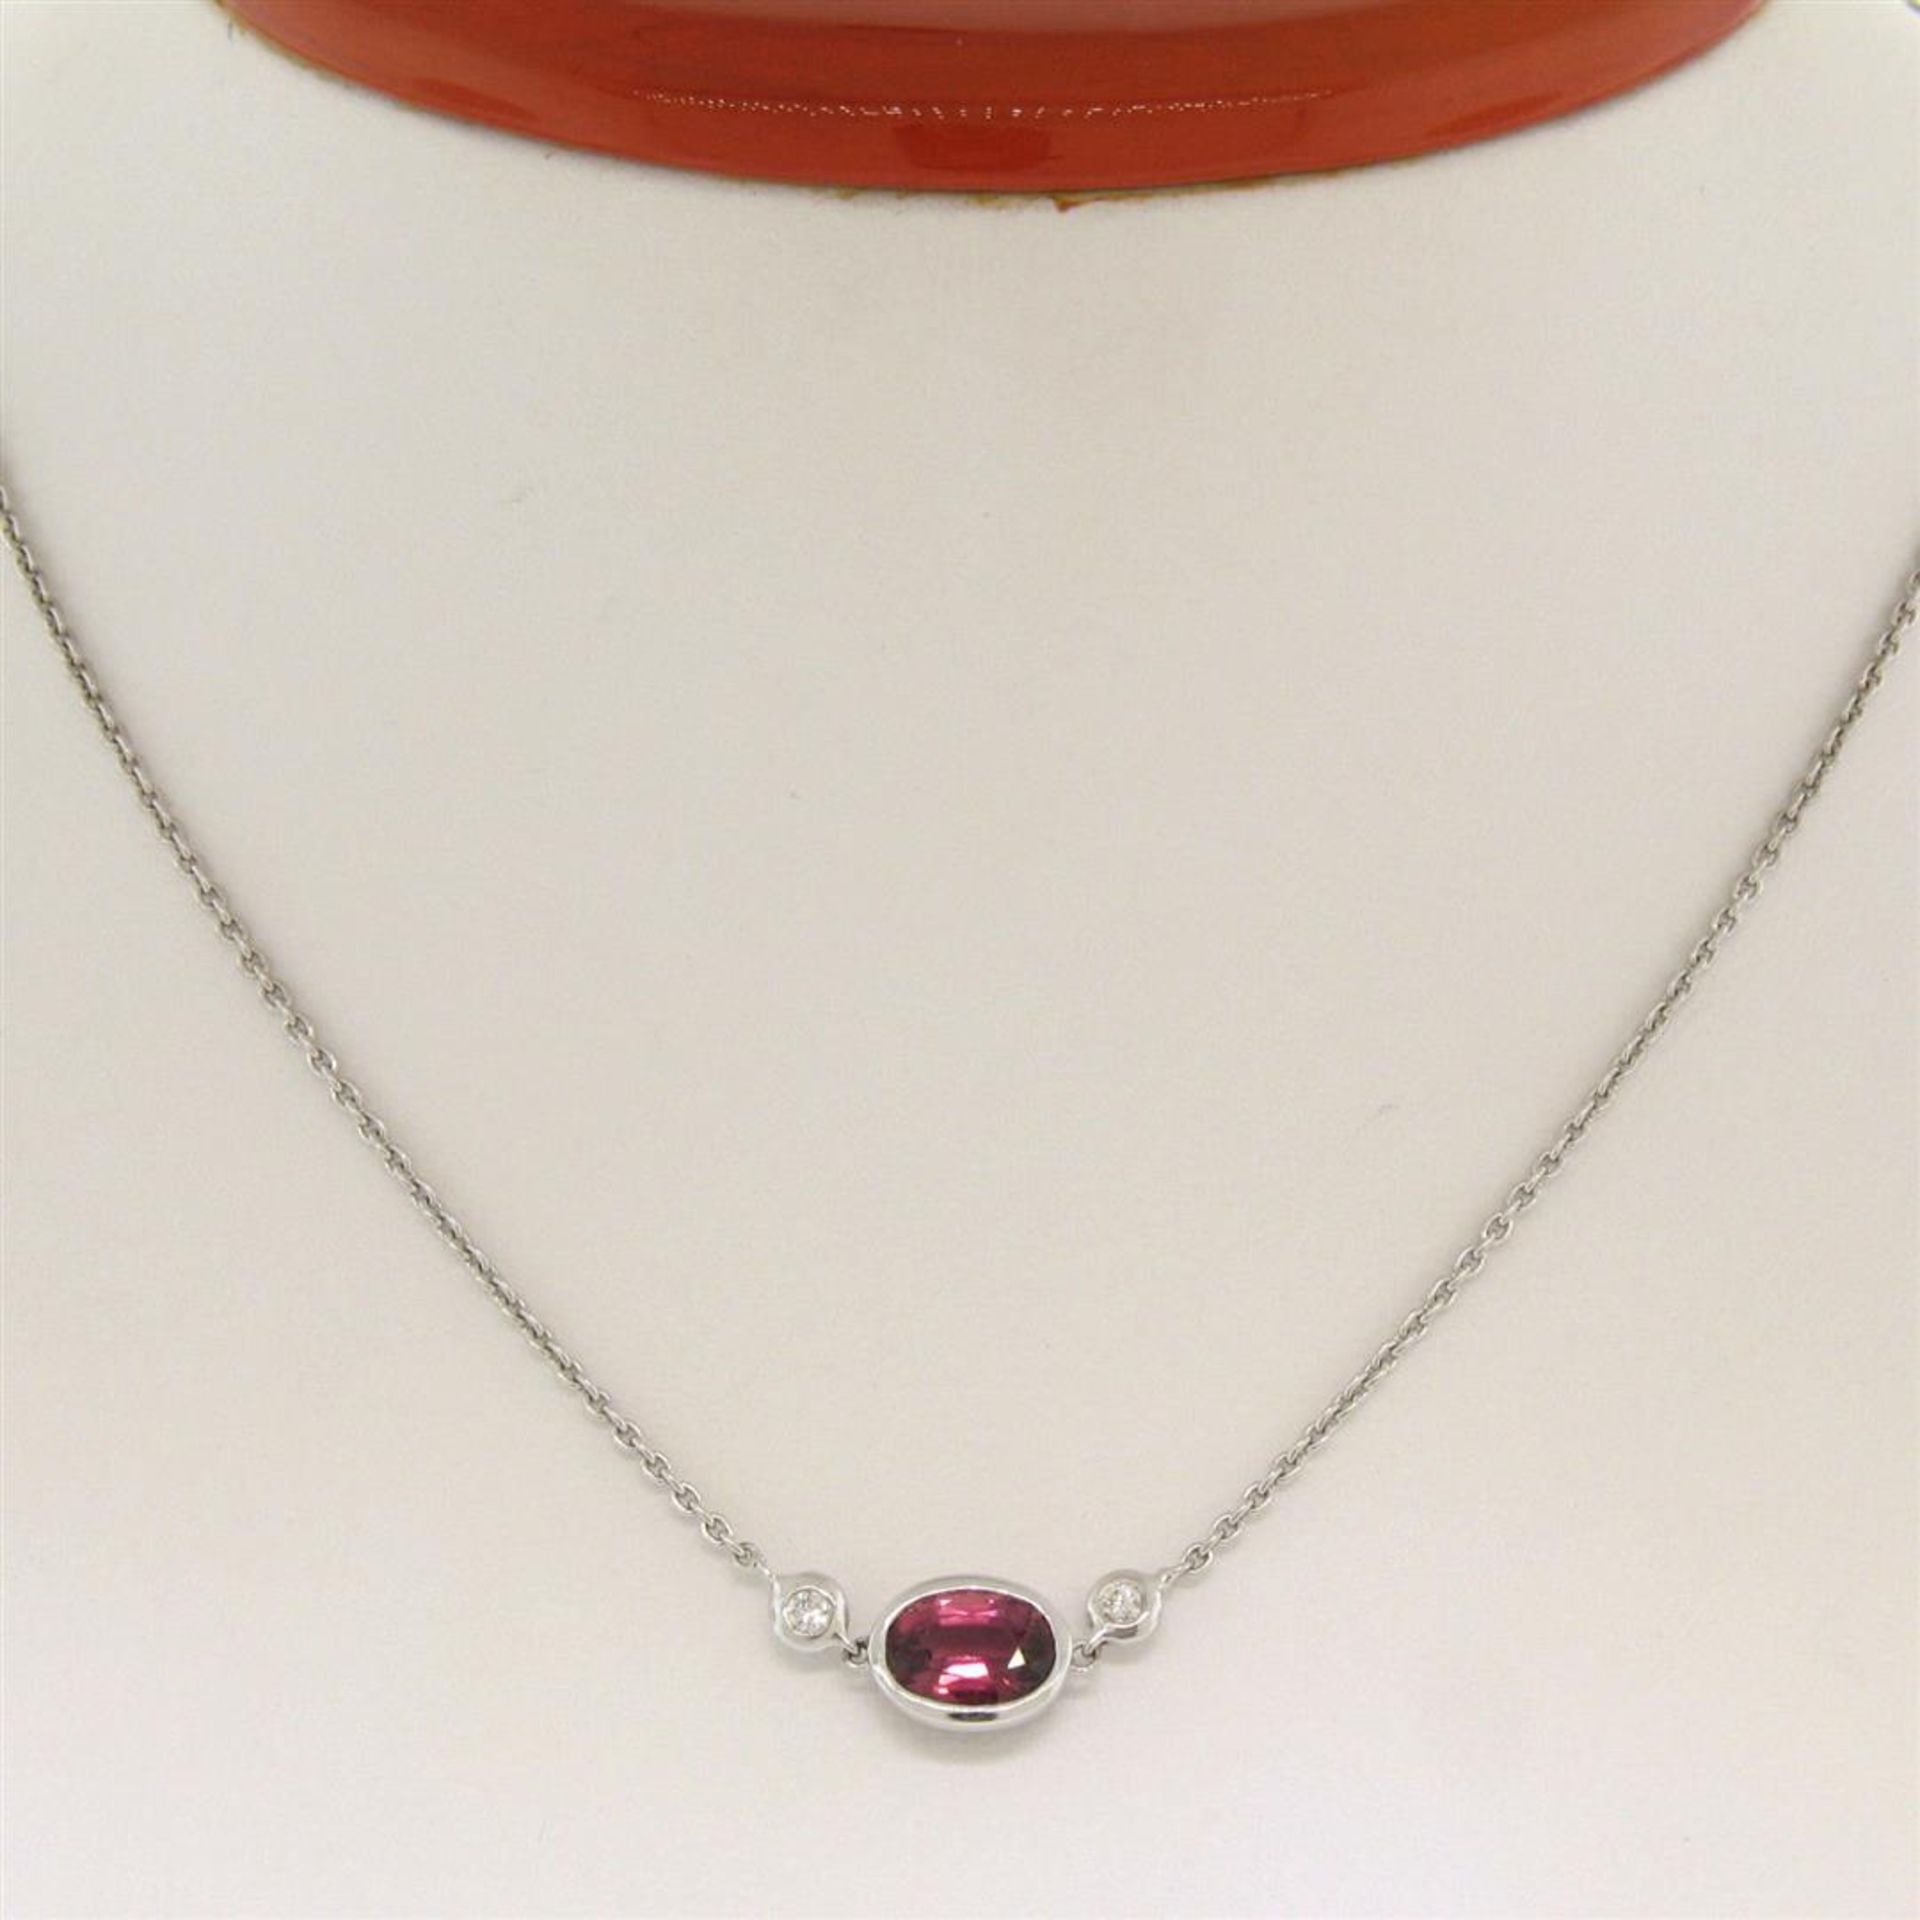 New 18kt White Gold 1.13 ctw GIA Pink Sapphire and Diamond Pendant Necklace - Image 3 of 9